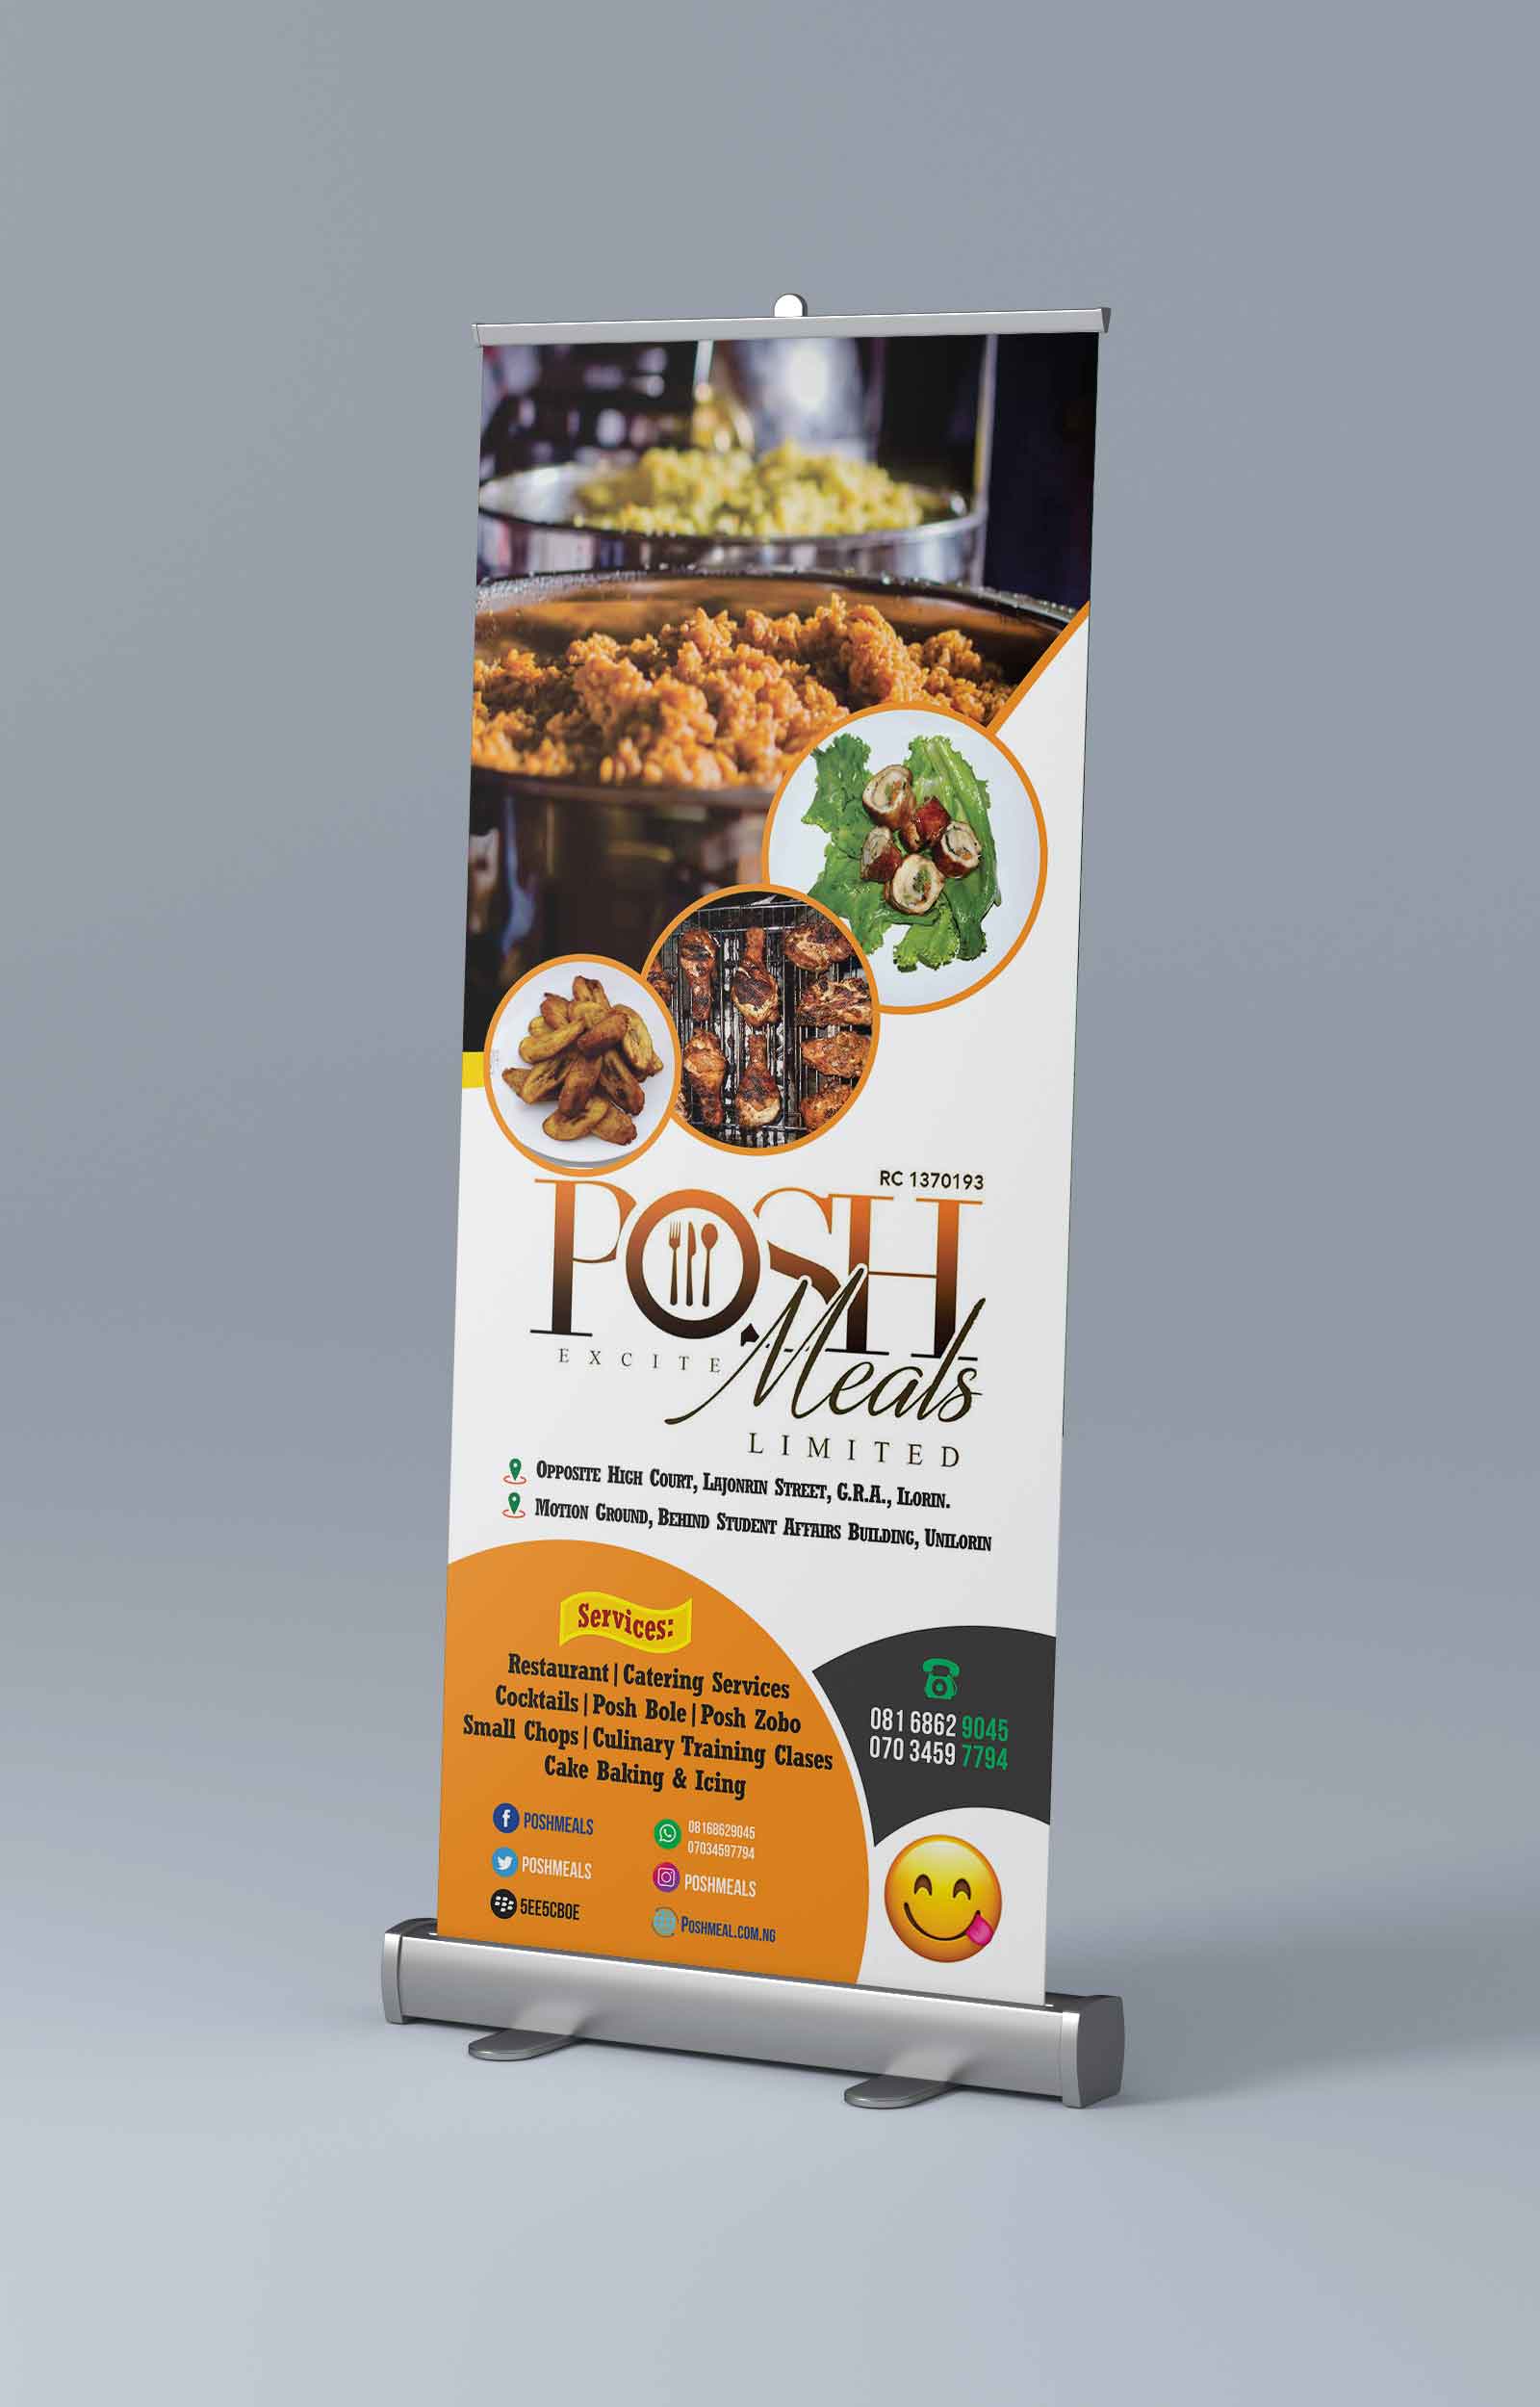 Get Custom Roll Up Banner Design And Printing - Design And Printing Company  In Kwara State, Nigeria